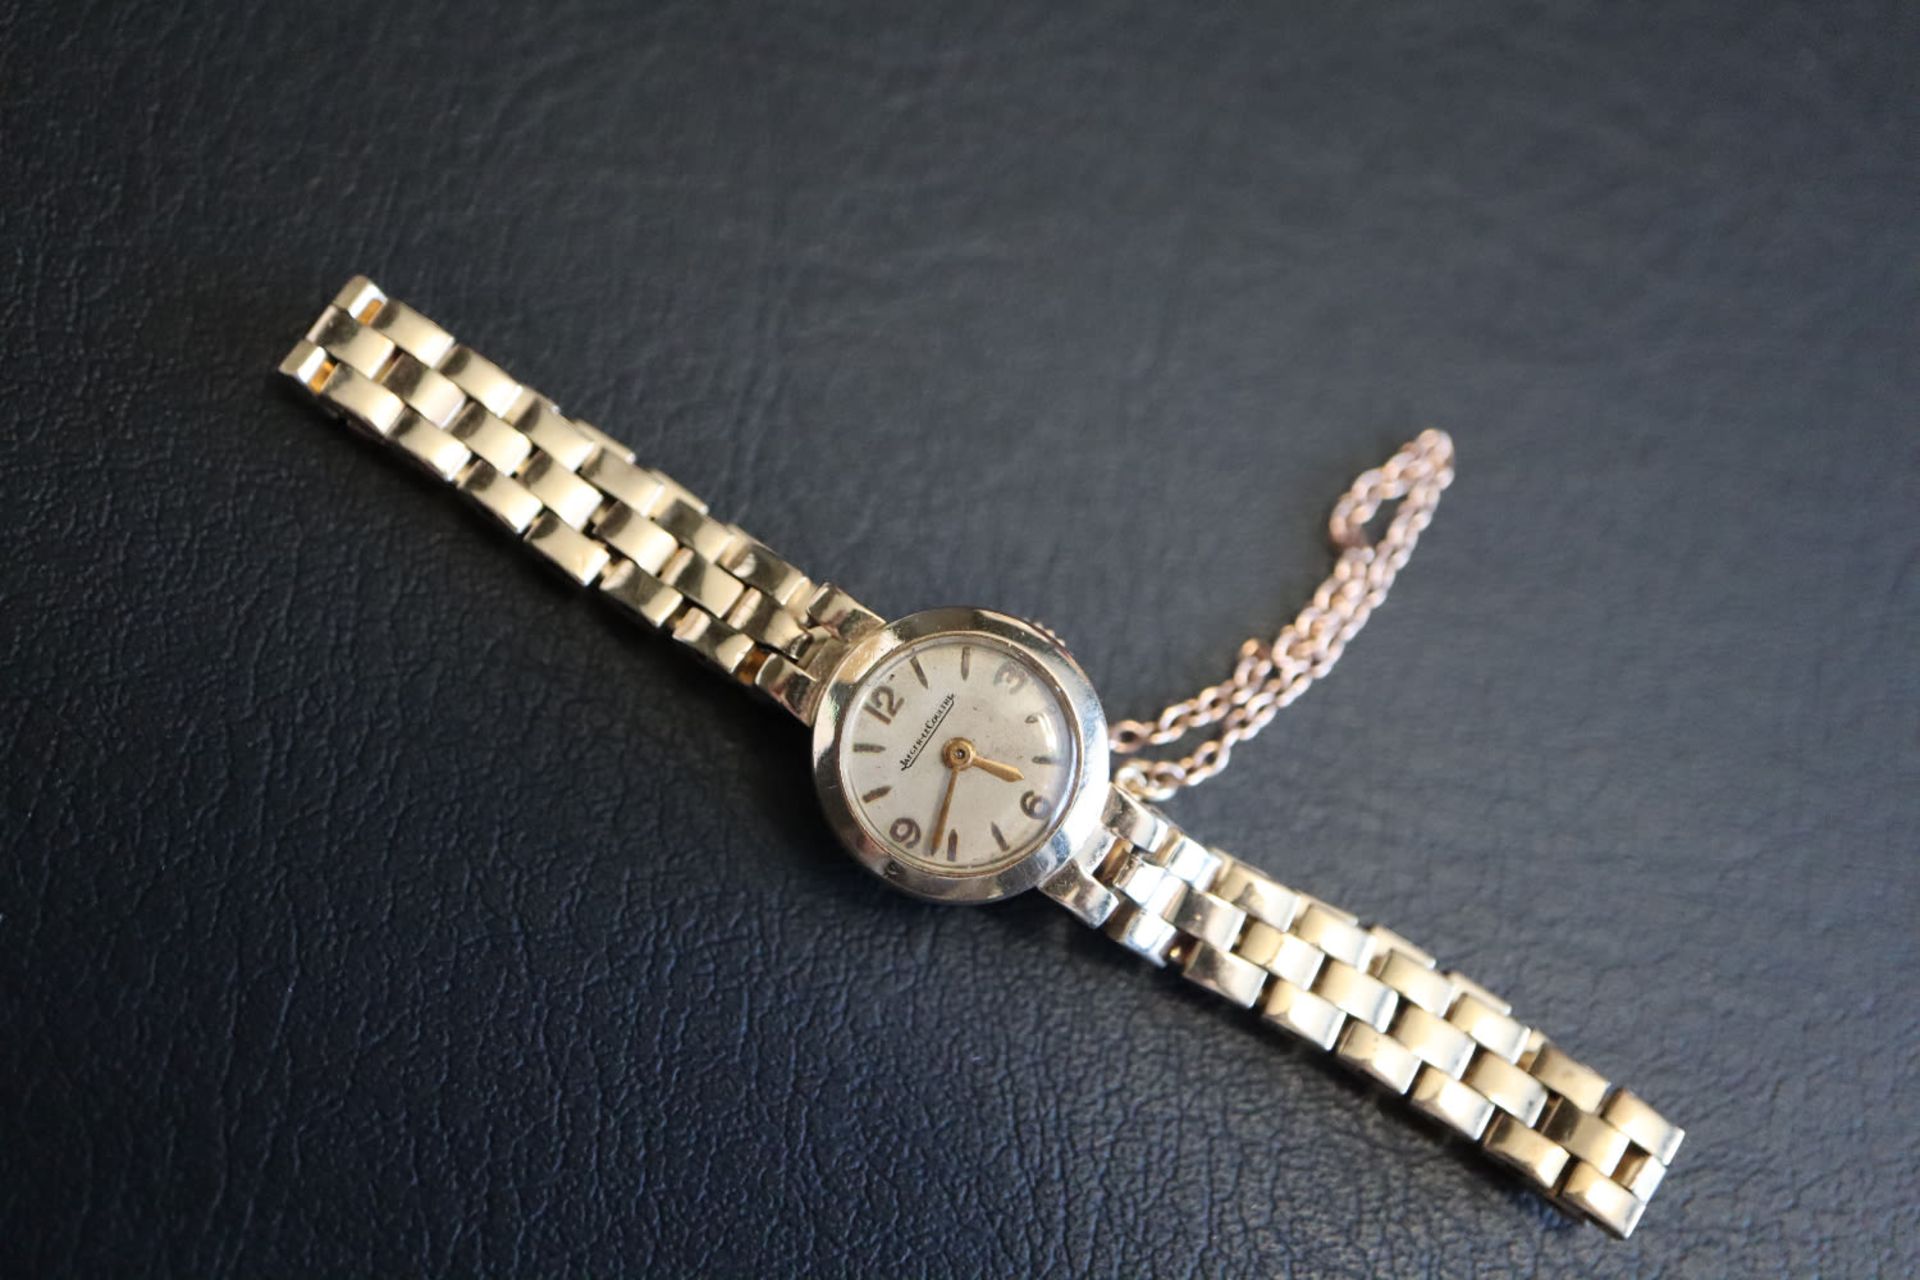 JAEGER-LE COULTRE - LADIES GOLD VINTAGE COCKTAIL WATCH (2811 SERIAL NO.) - Image 4 of 4